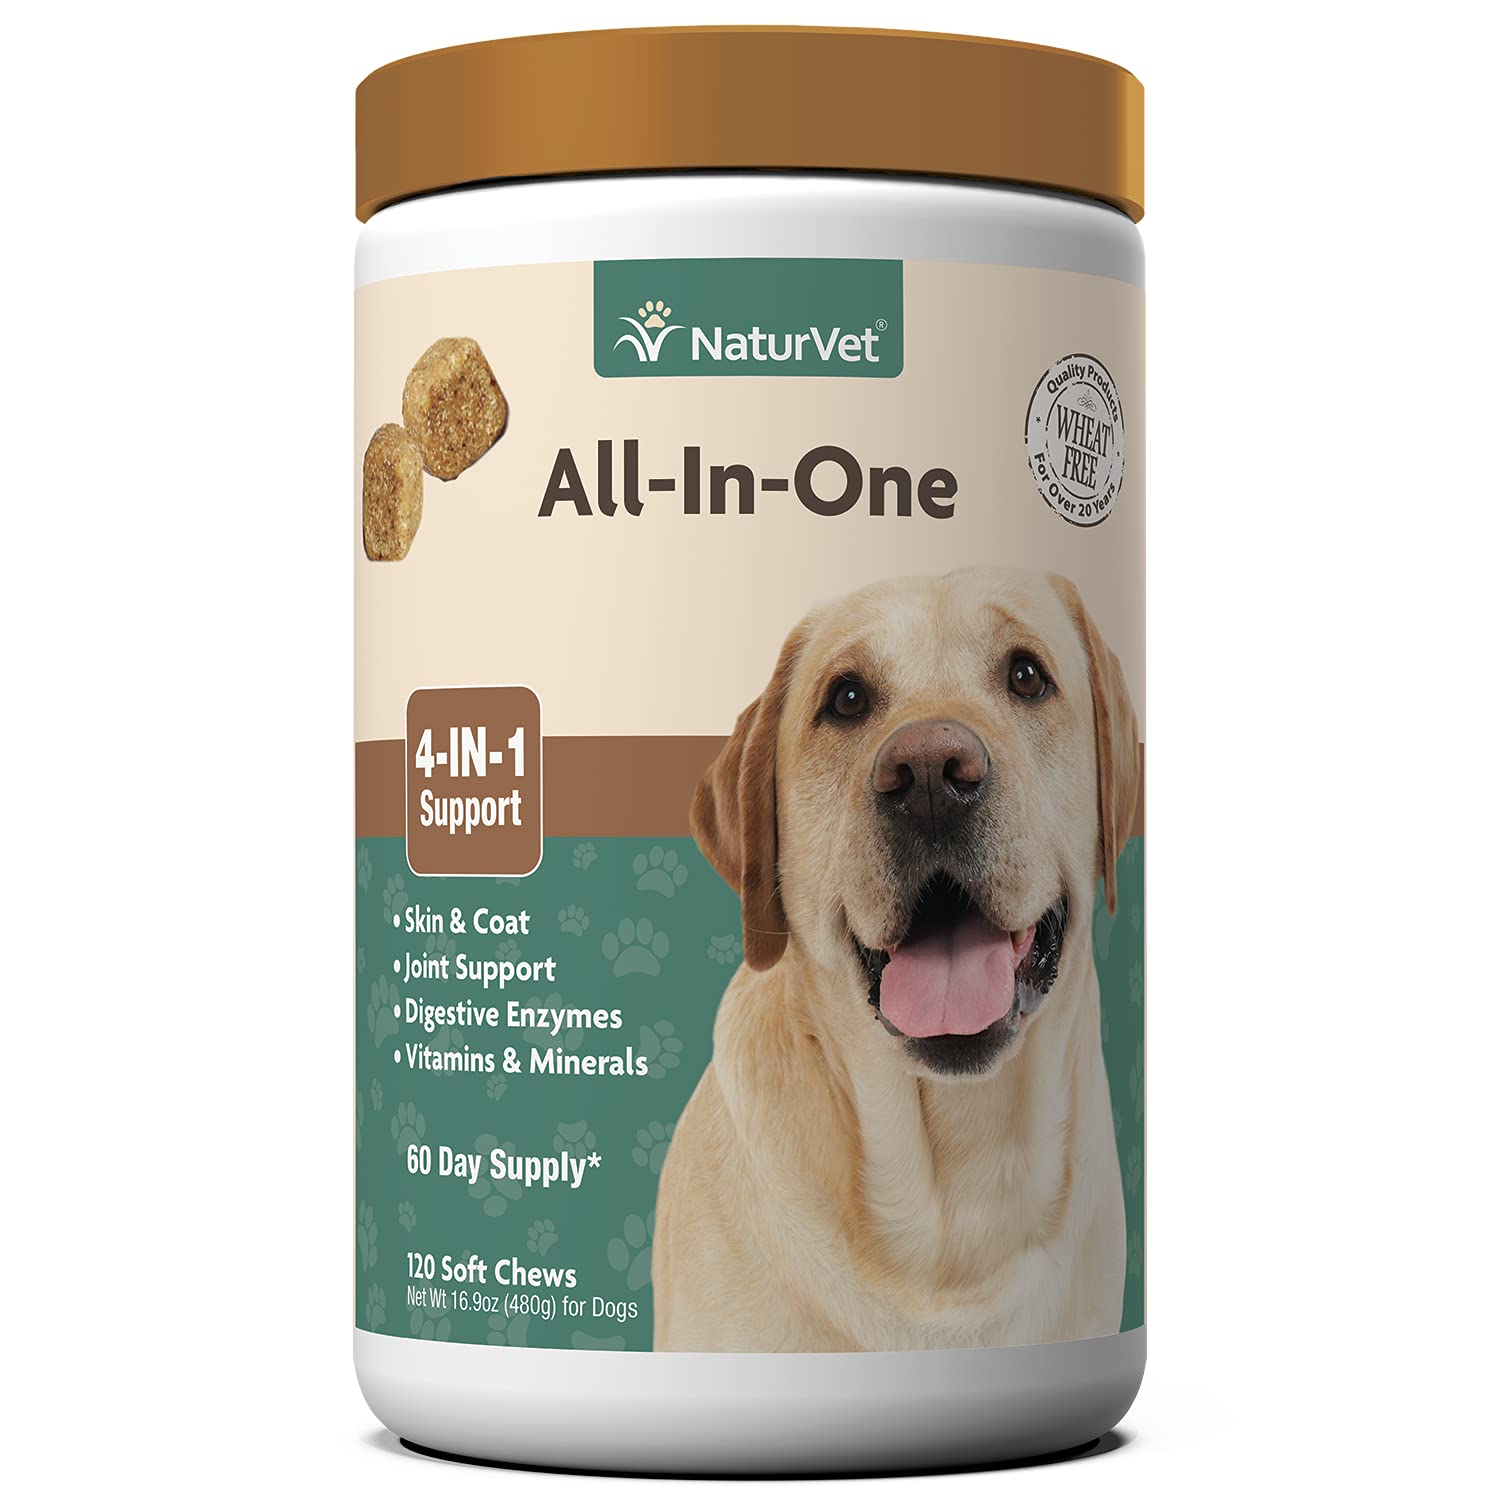 Amazon.com : NaturVet All-in-One Dog Supplement - for Joint Support, Digestion, Skin, Coat Care – Dog Vitamins, Minerals, Omega-3, 6, 9 – Wheat-Free Supplements for Dogs–120 Soft Chews : Pet Supplies